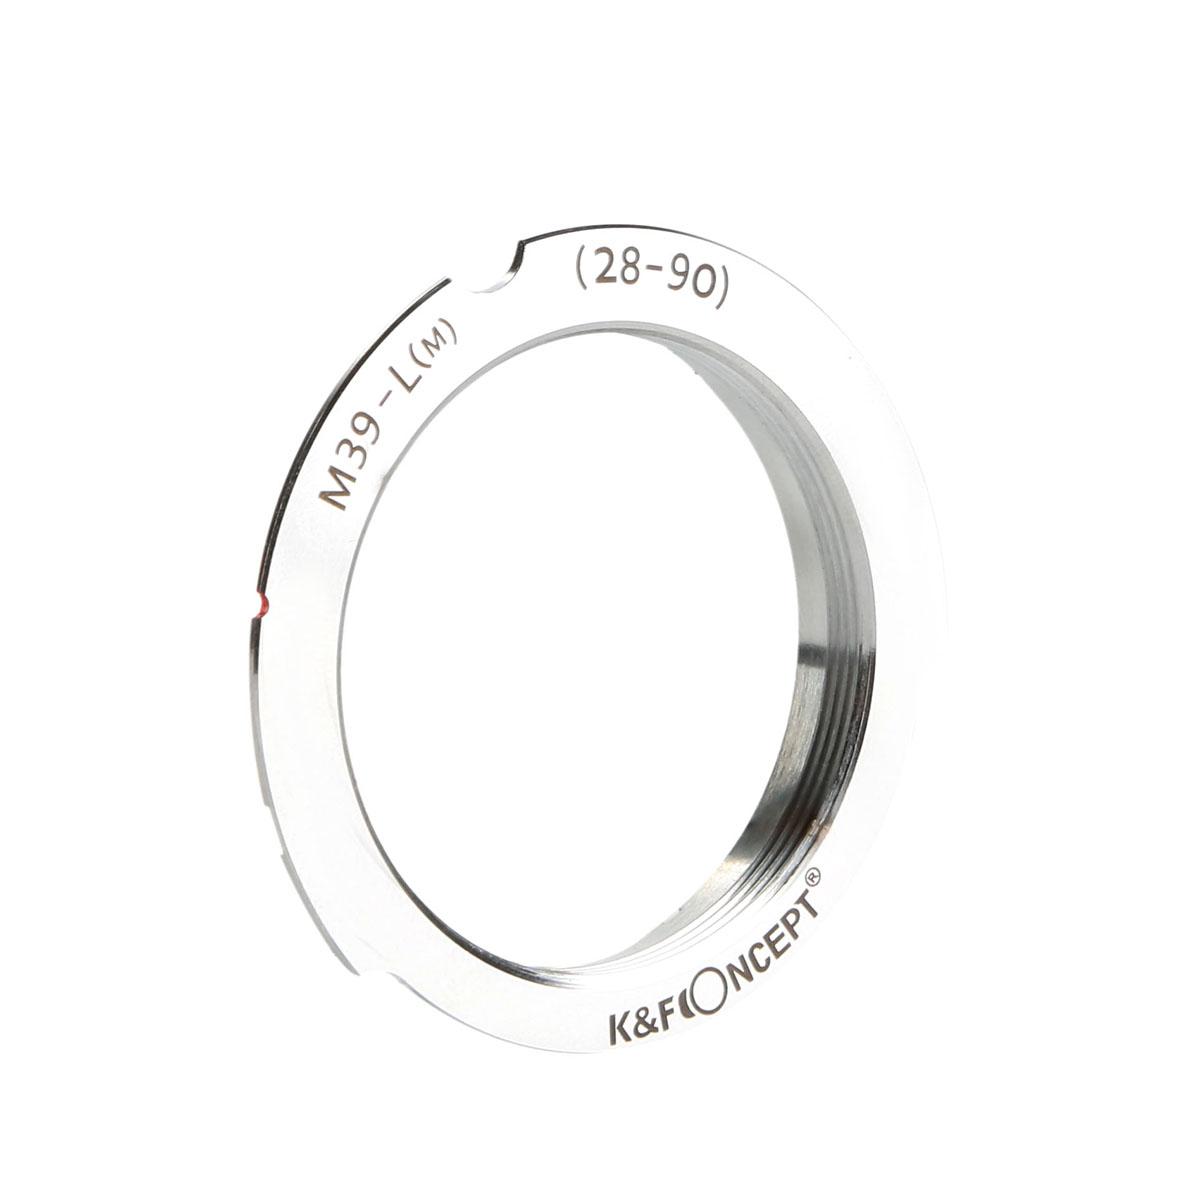 K&F Concept Lens Adapter KF06.275 for M39 - LM (28mm - 90mm)